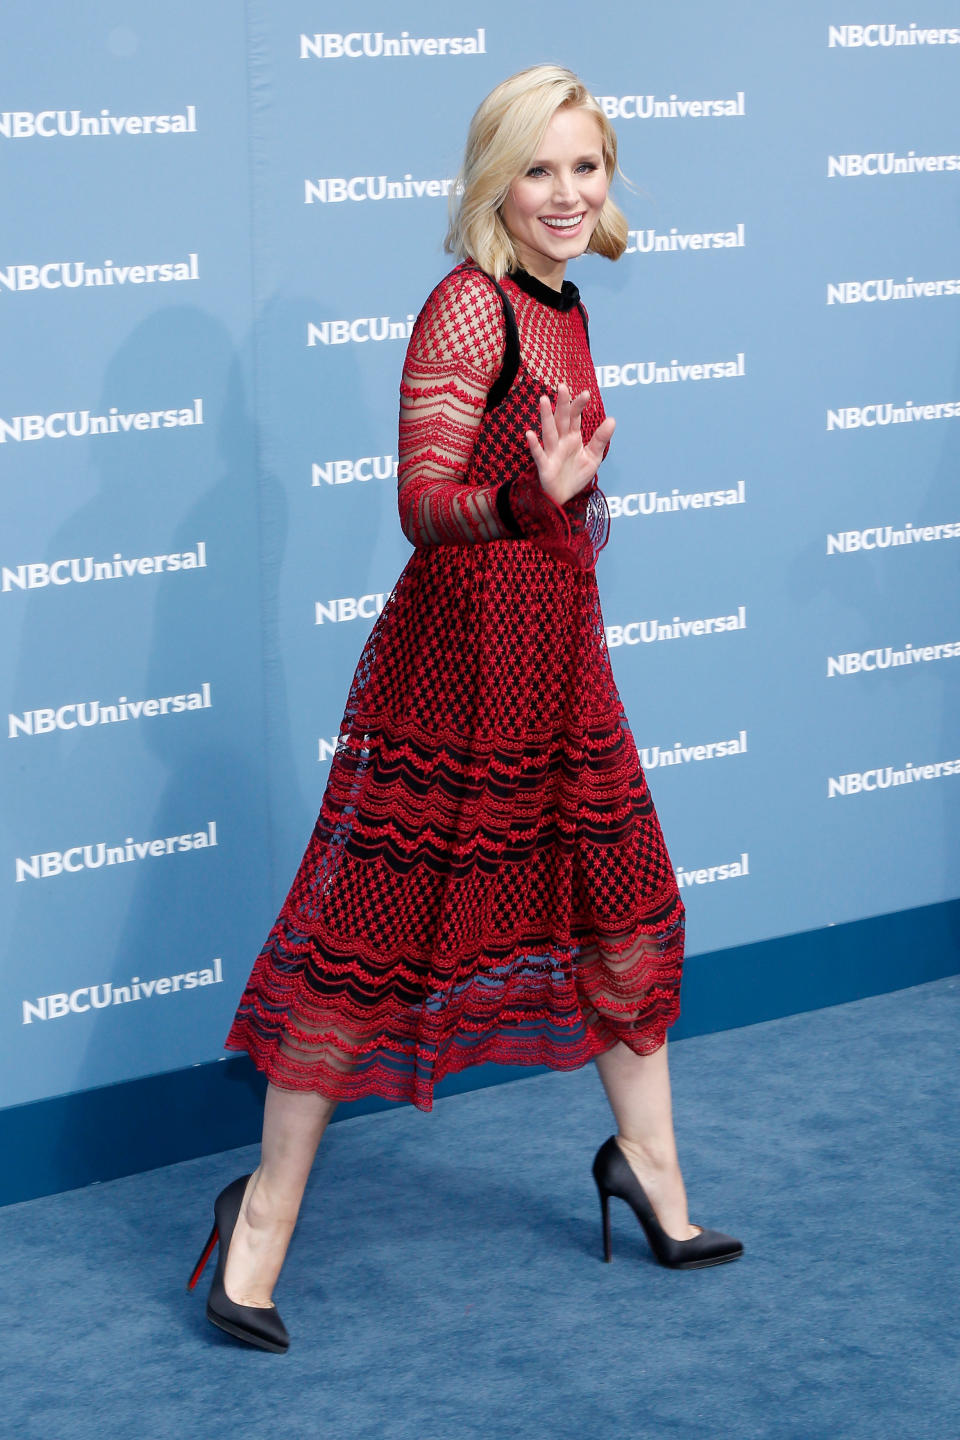 Kristen Bell attends the NBCUniversal 2016 Upfront on May 16, 2016, in New York.